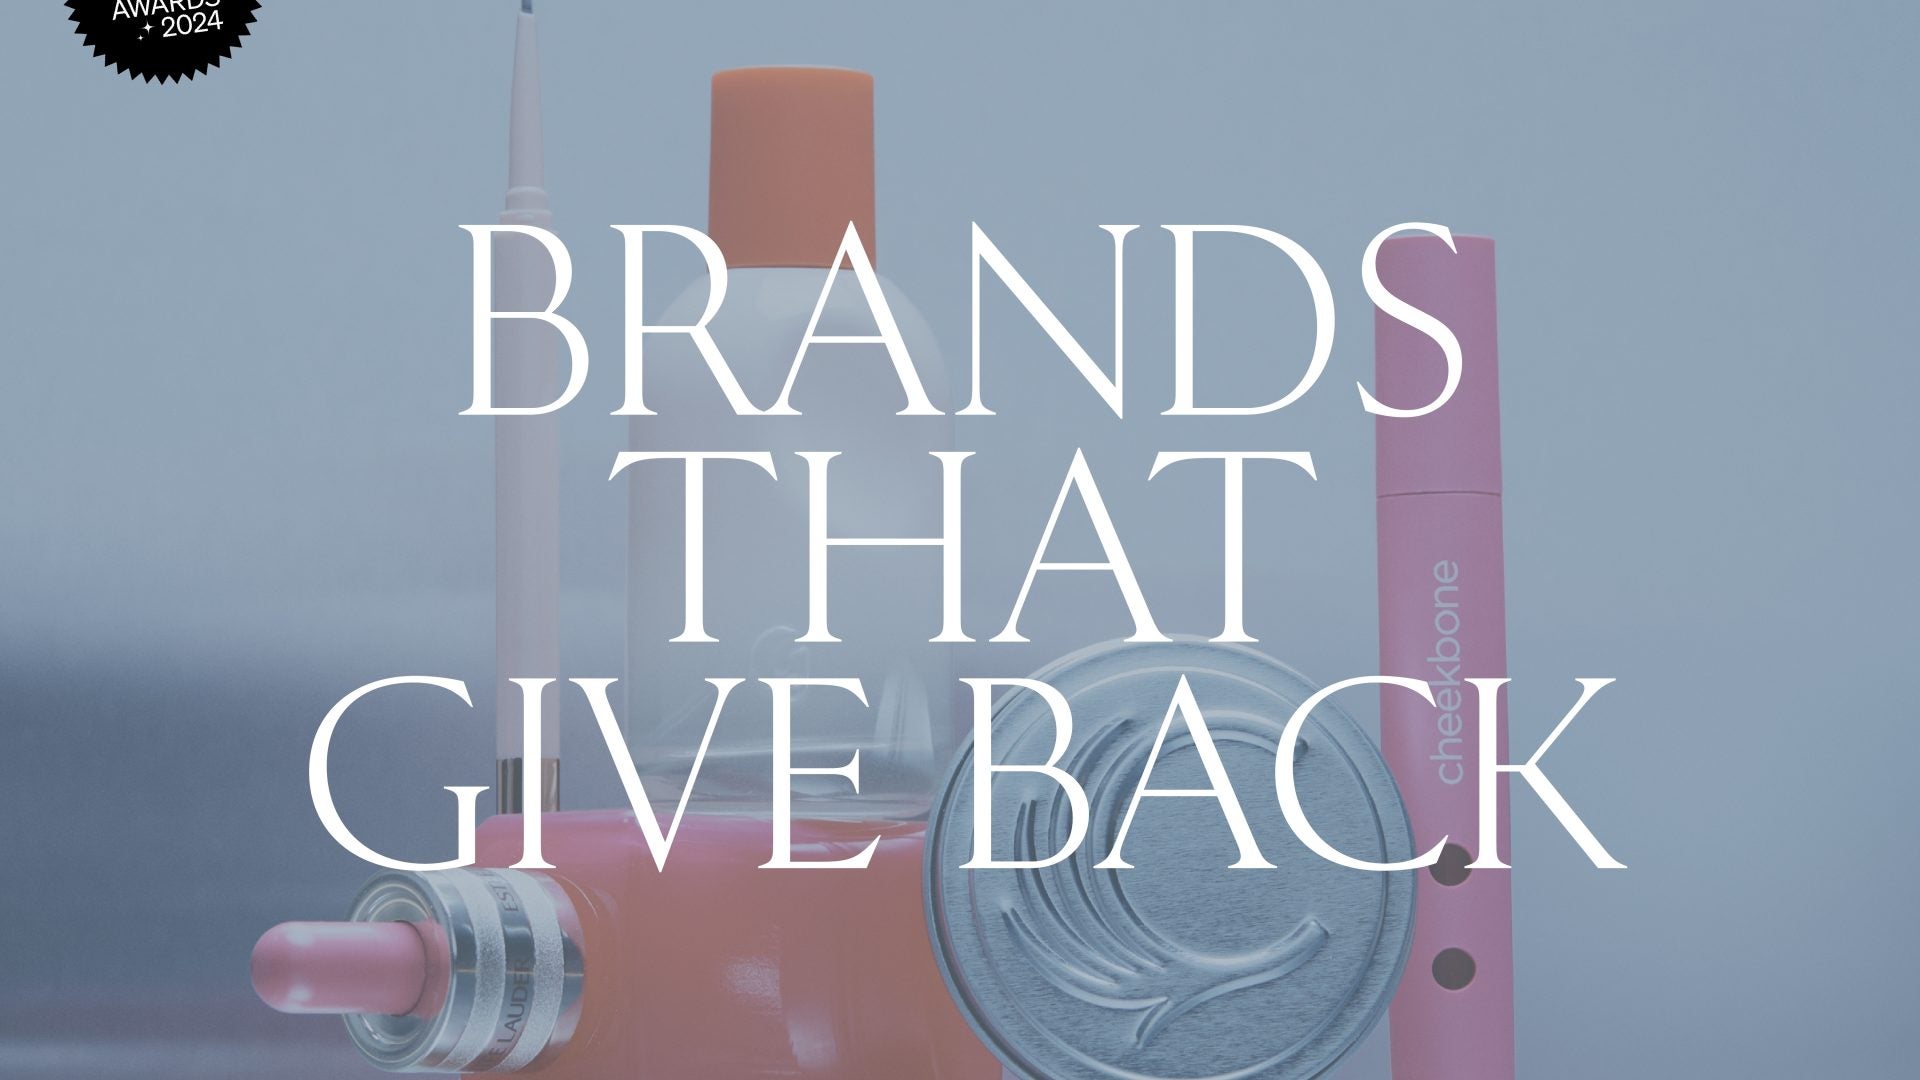 Best In Beauty Awards 2024: Brands That Give Back